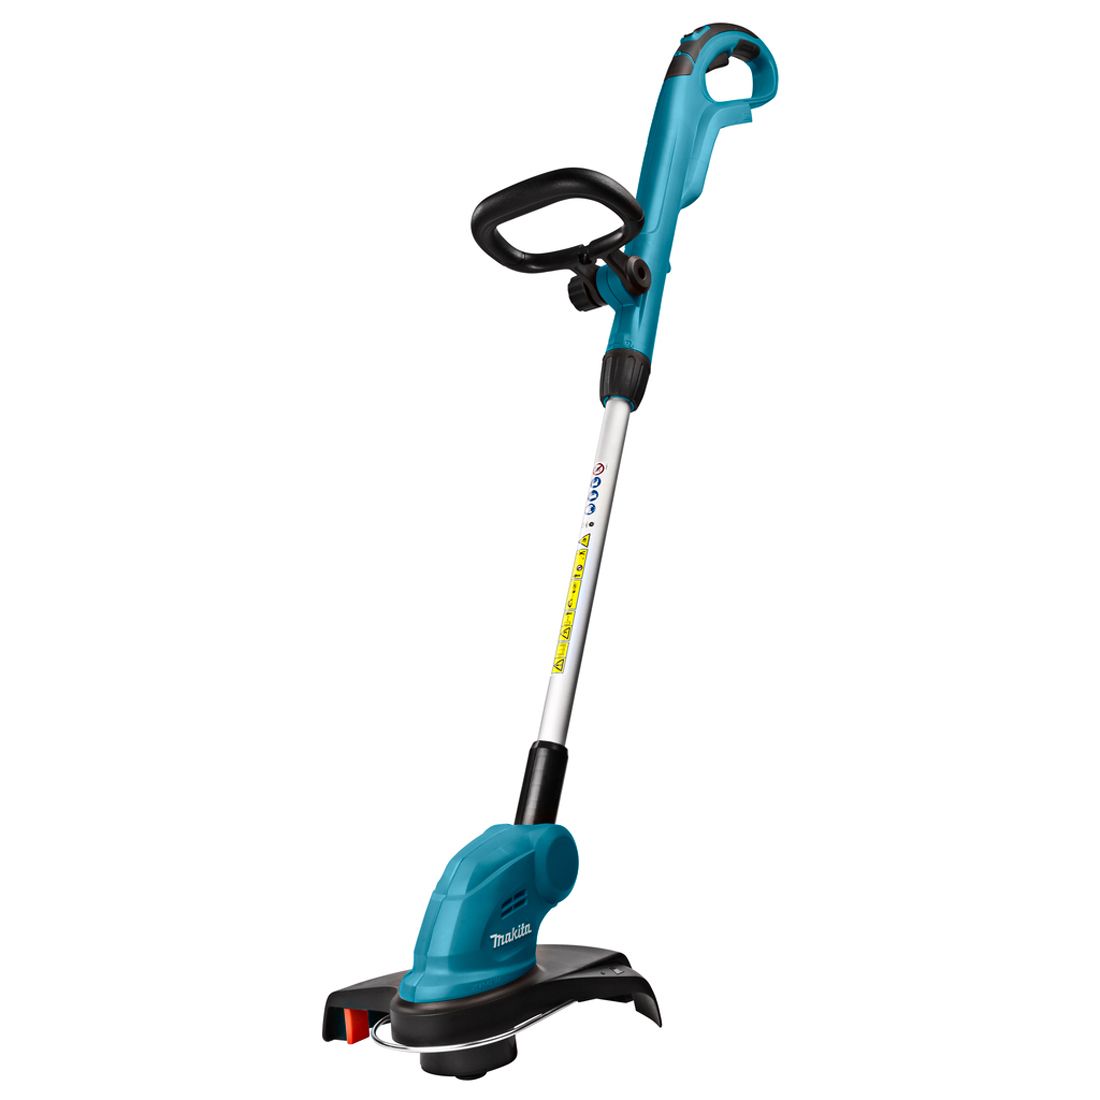 Bare Tool No battery Makita DUR181Z 18V Body Only Cordless Li-Ion Line String Trimmer Mower Easy to Use 